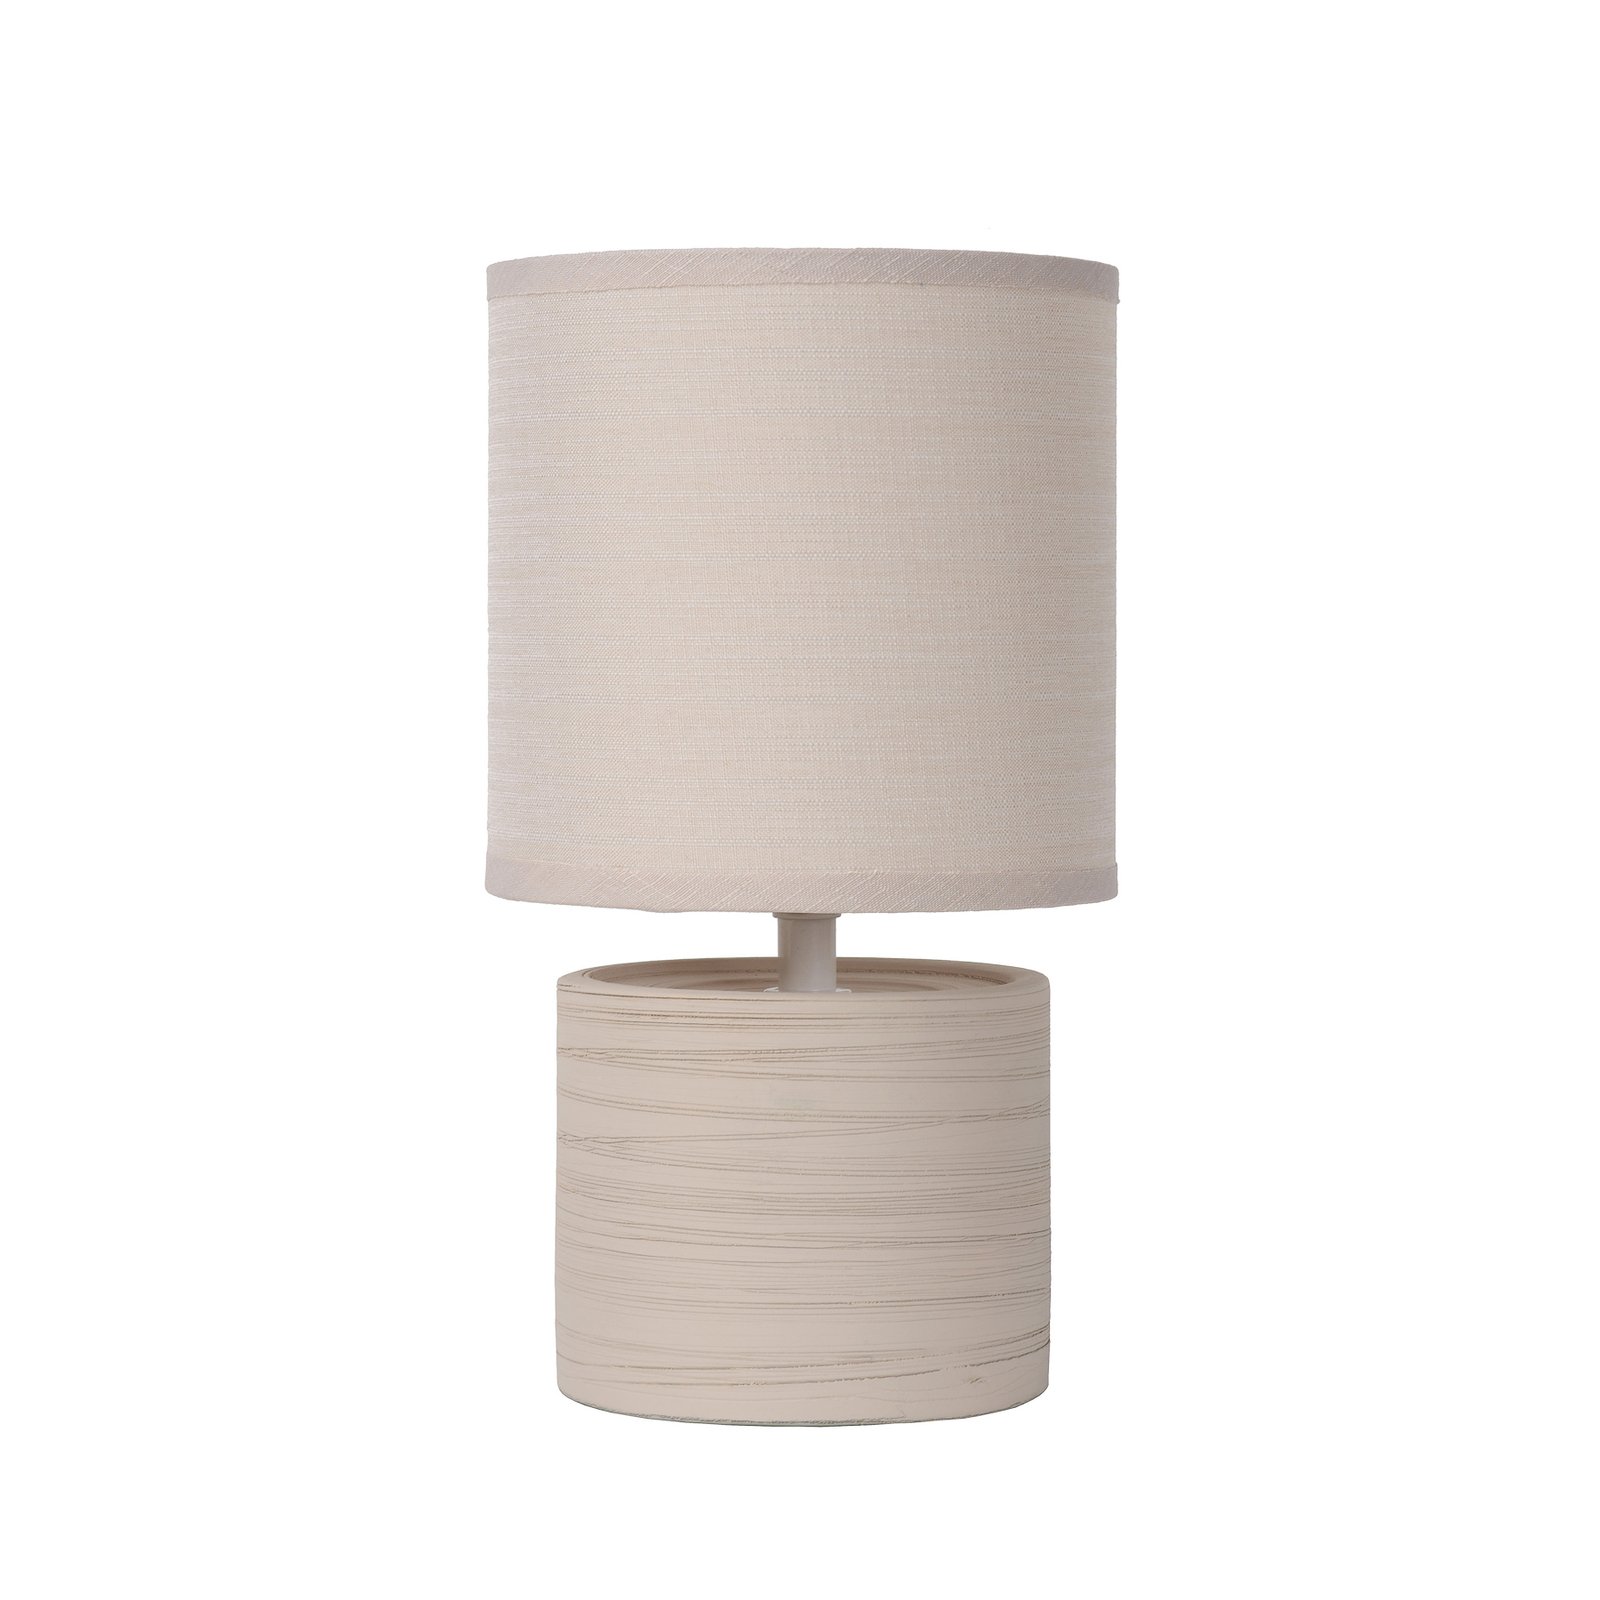 Greasby table lamp, fabric lampshade, beige